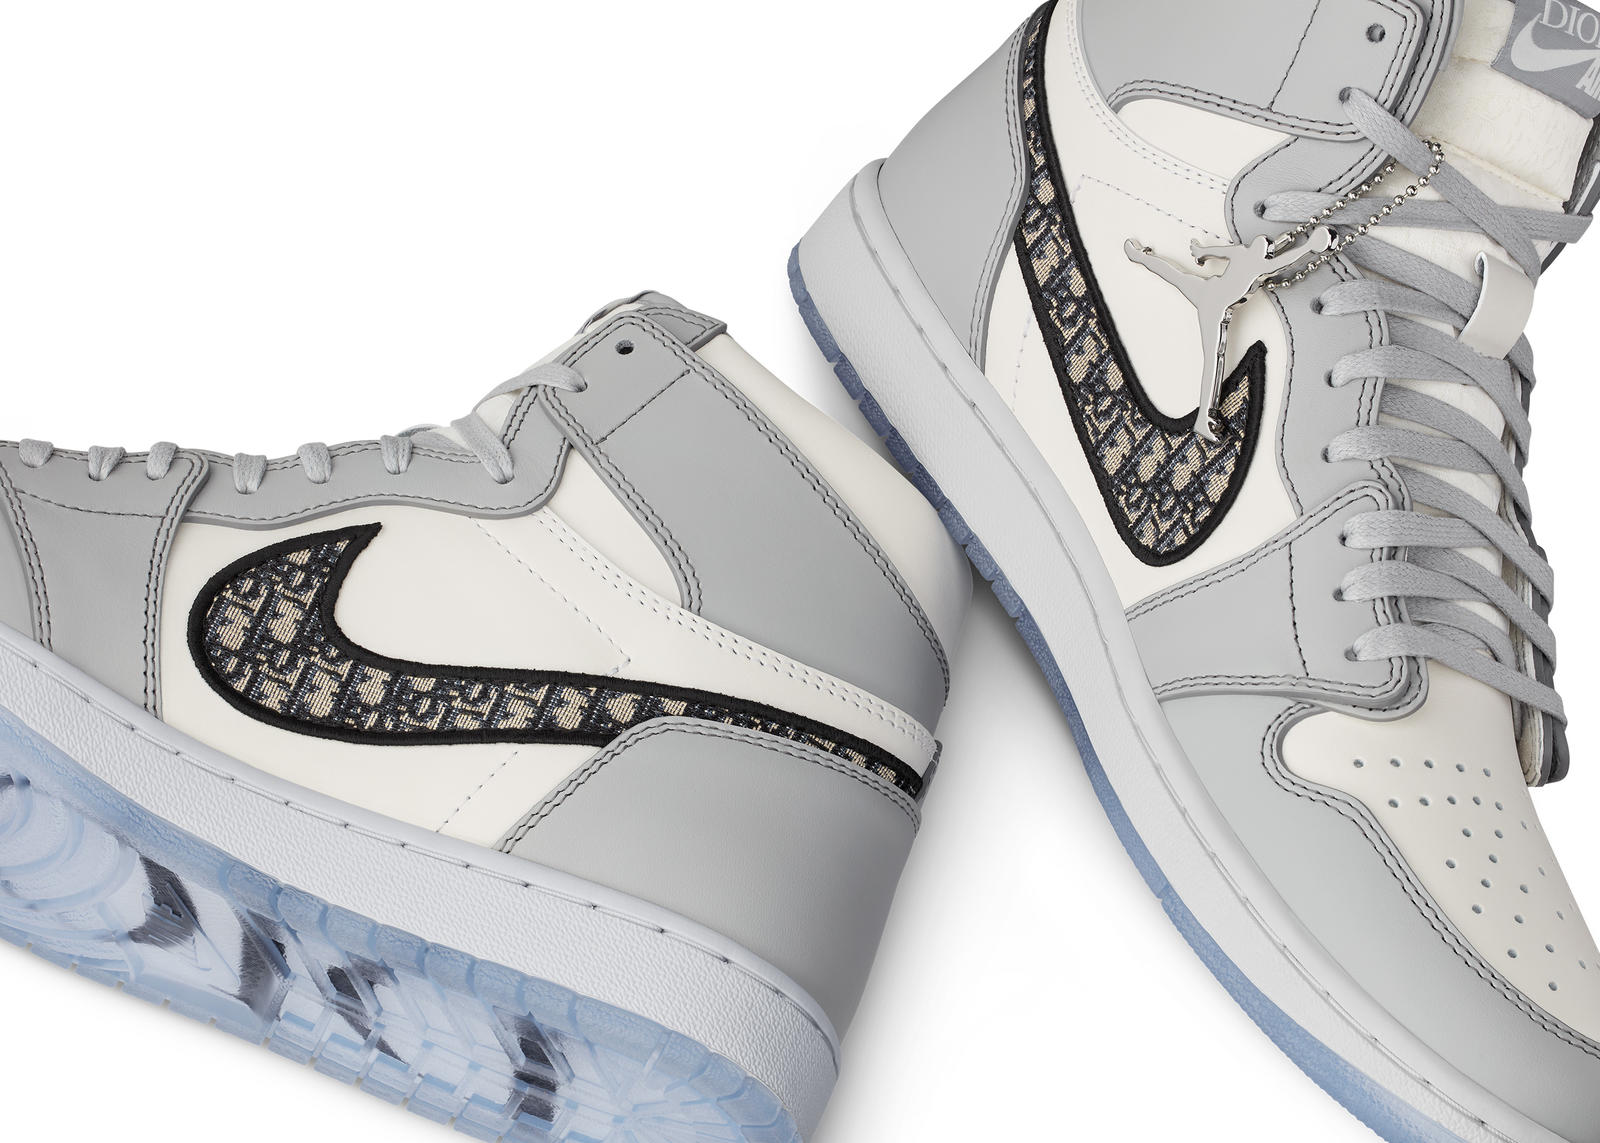 Jordan Brand and Dior Unveil Their Upcoming “Air Dior” Collection